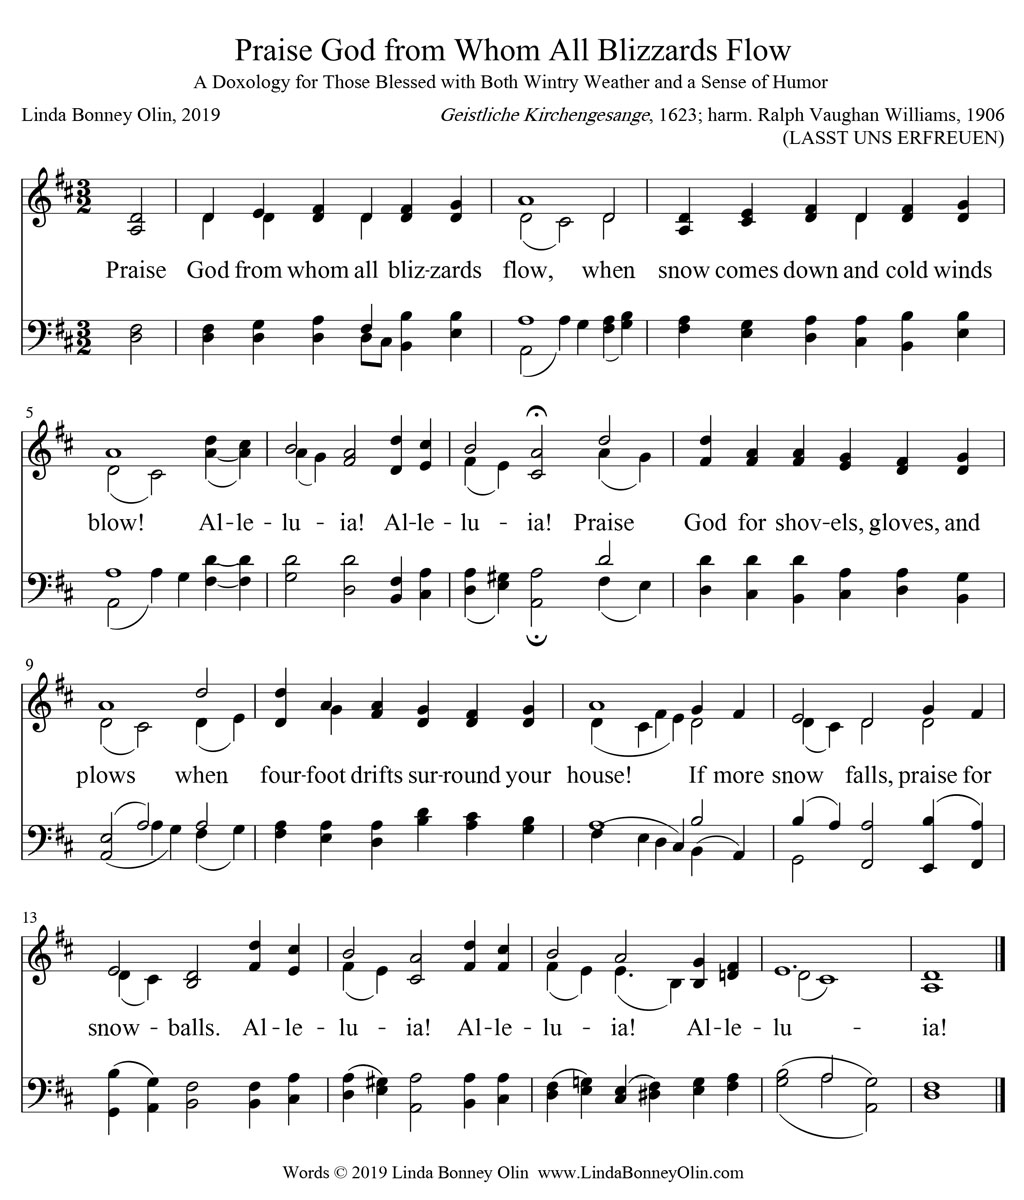 Music score of "Praise God from Whom All Blizzards Flow" by Linda Bonney Olin